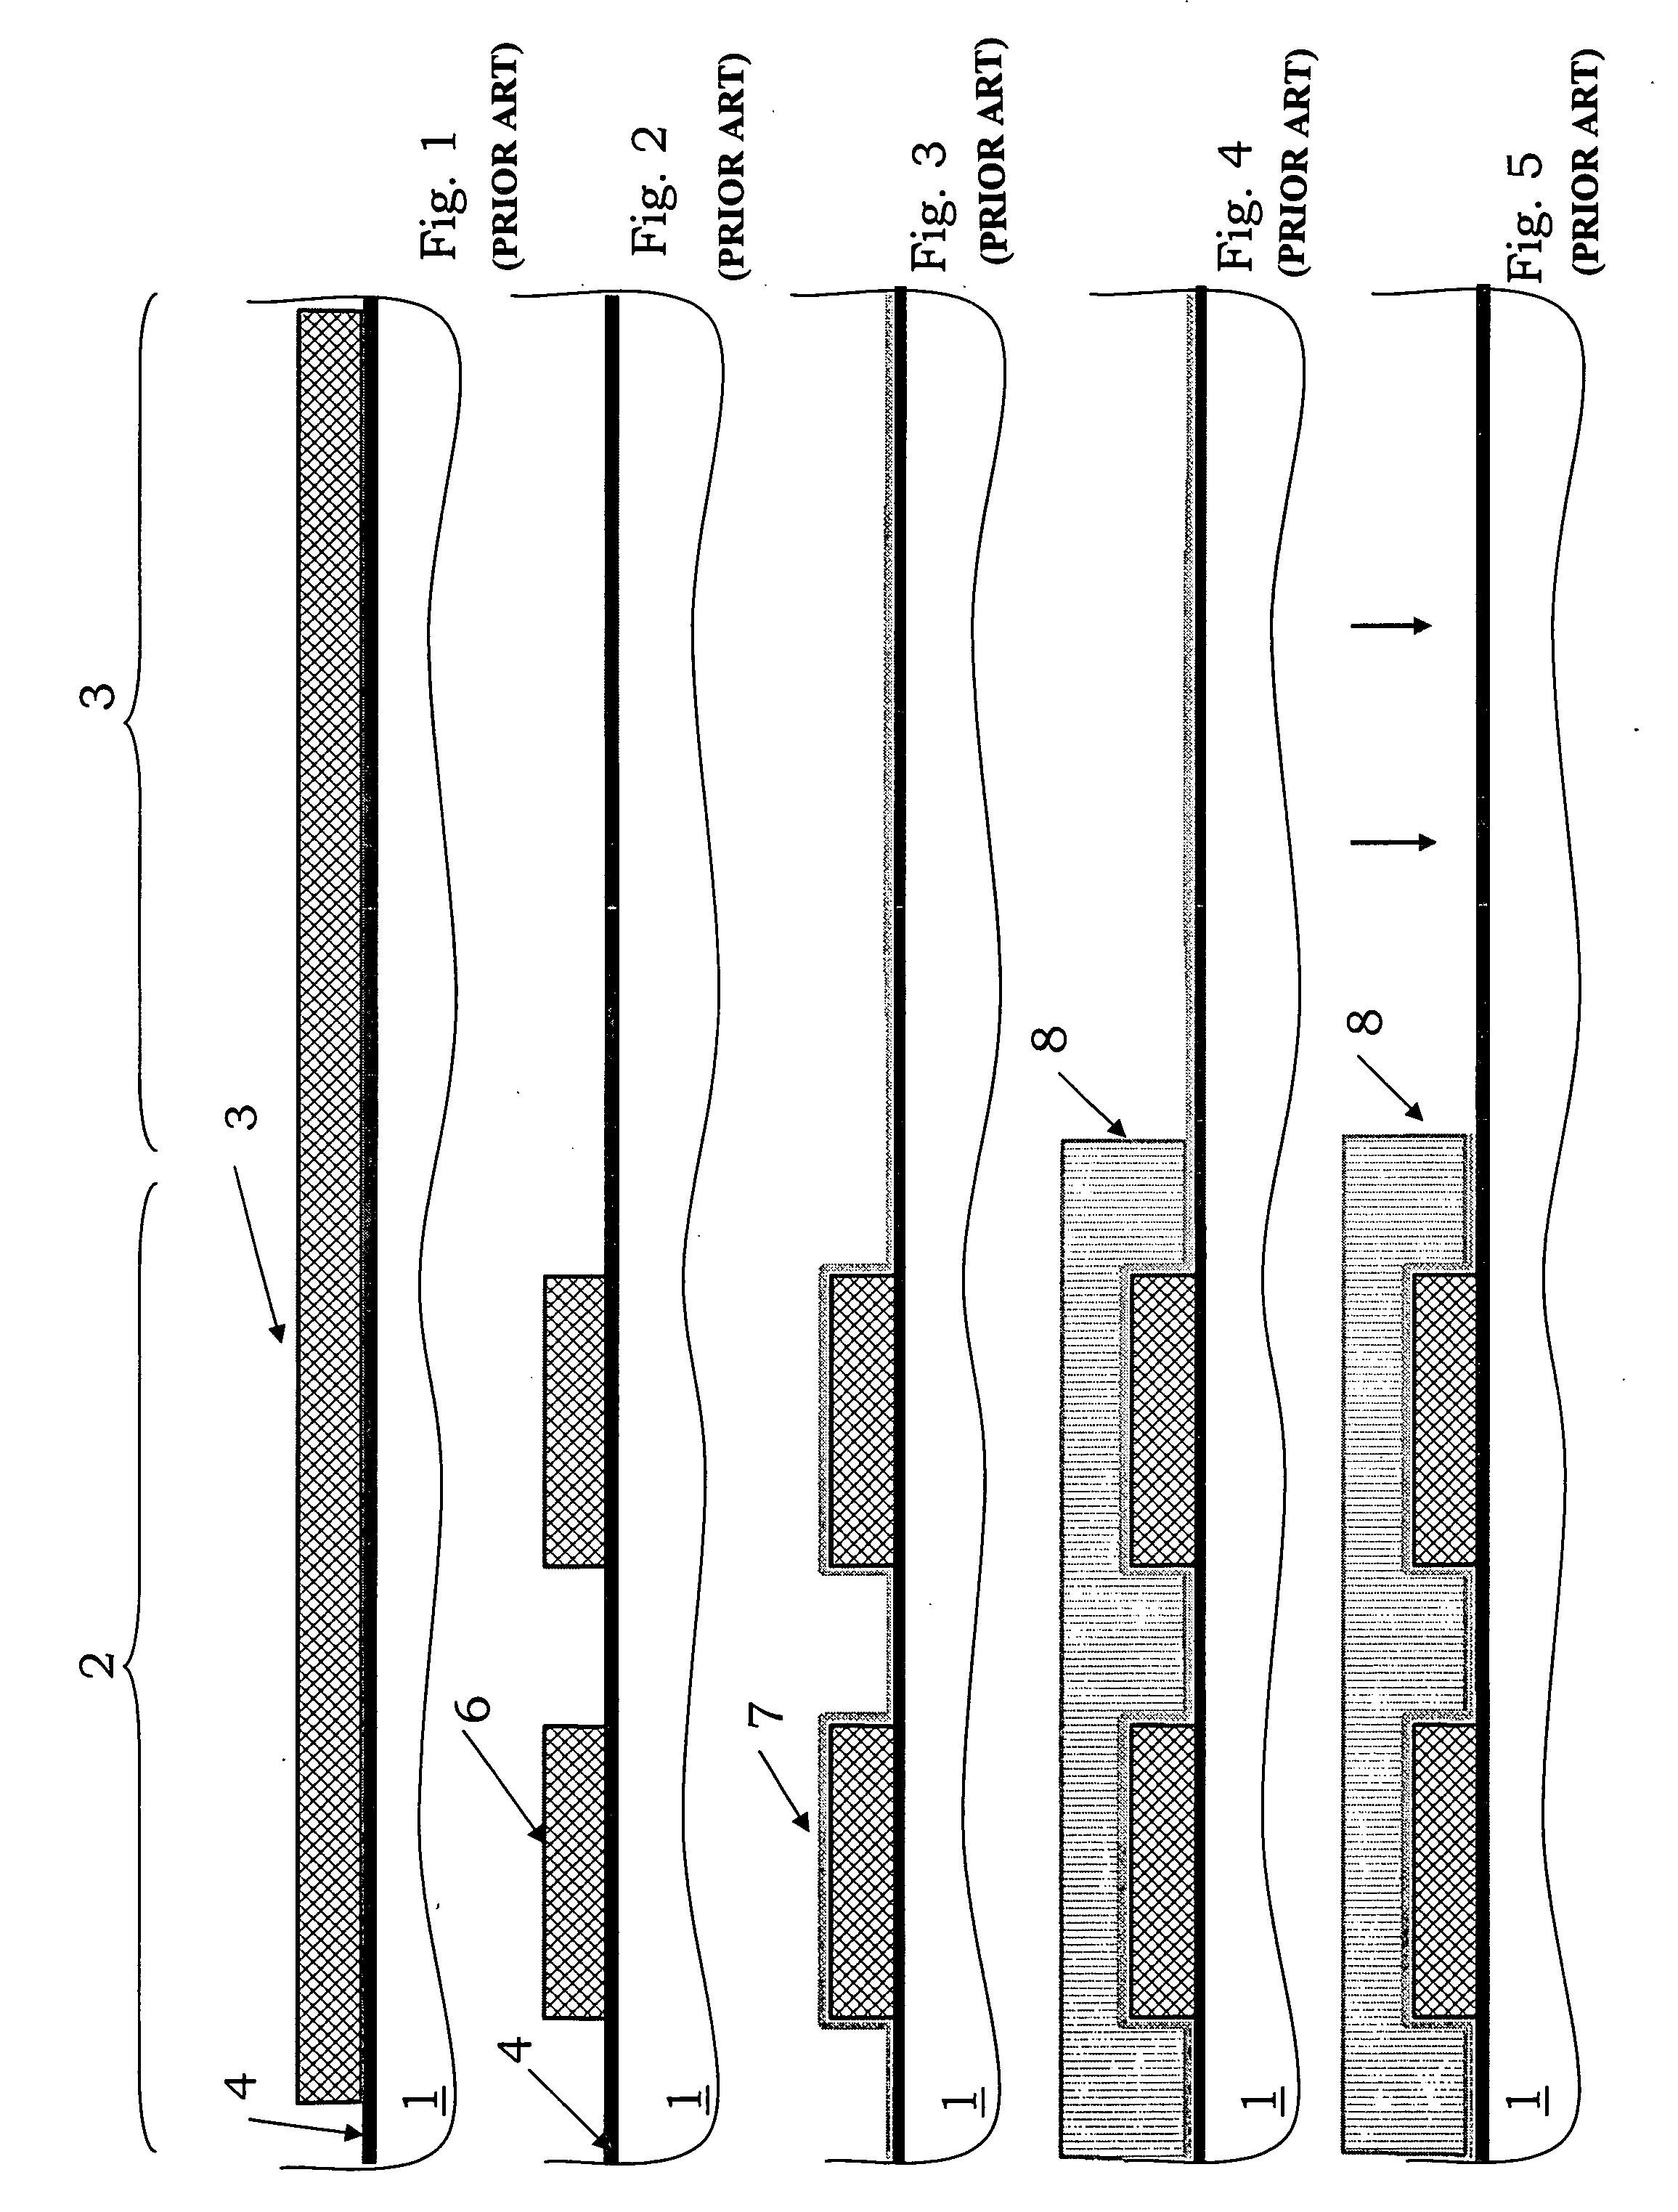 Method for manufacturing electronic memory devices integrated in a semiconductor substrate including non-volatile memory matrix and associated circuitry